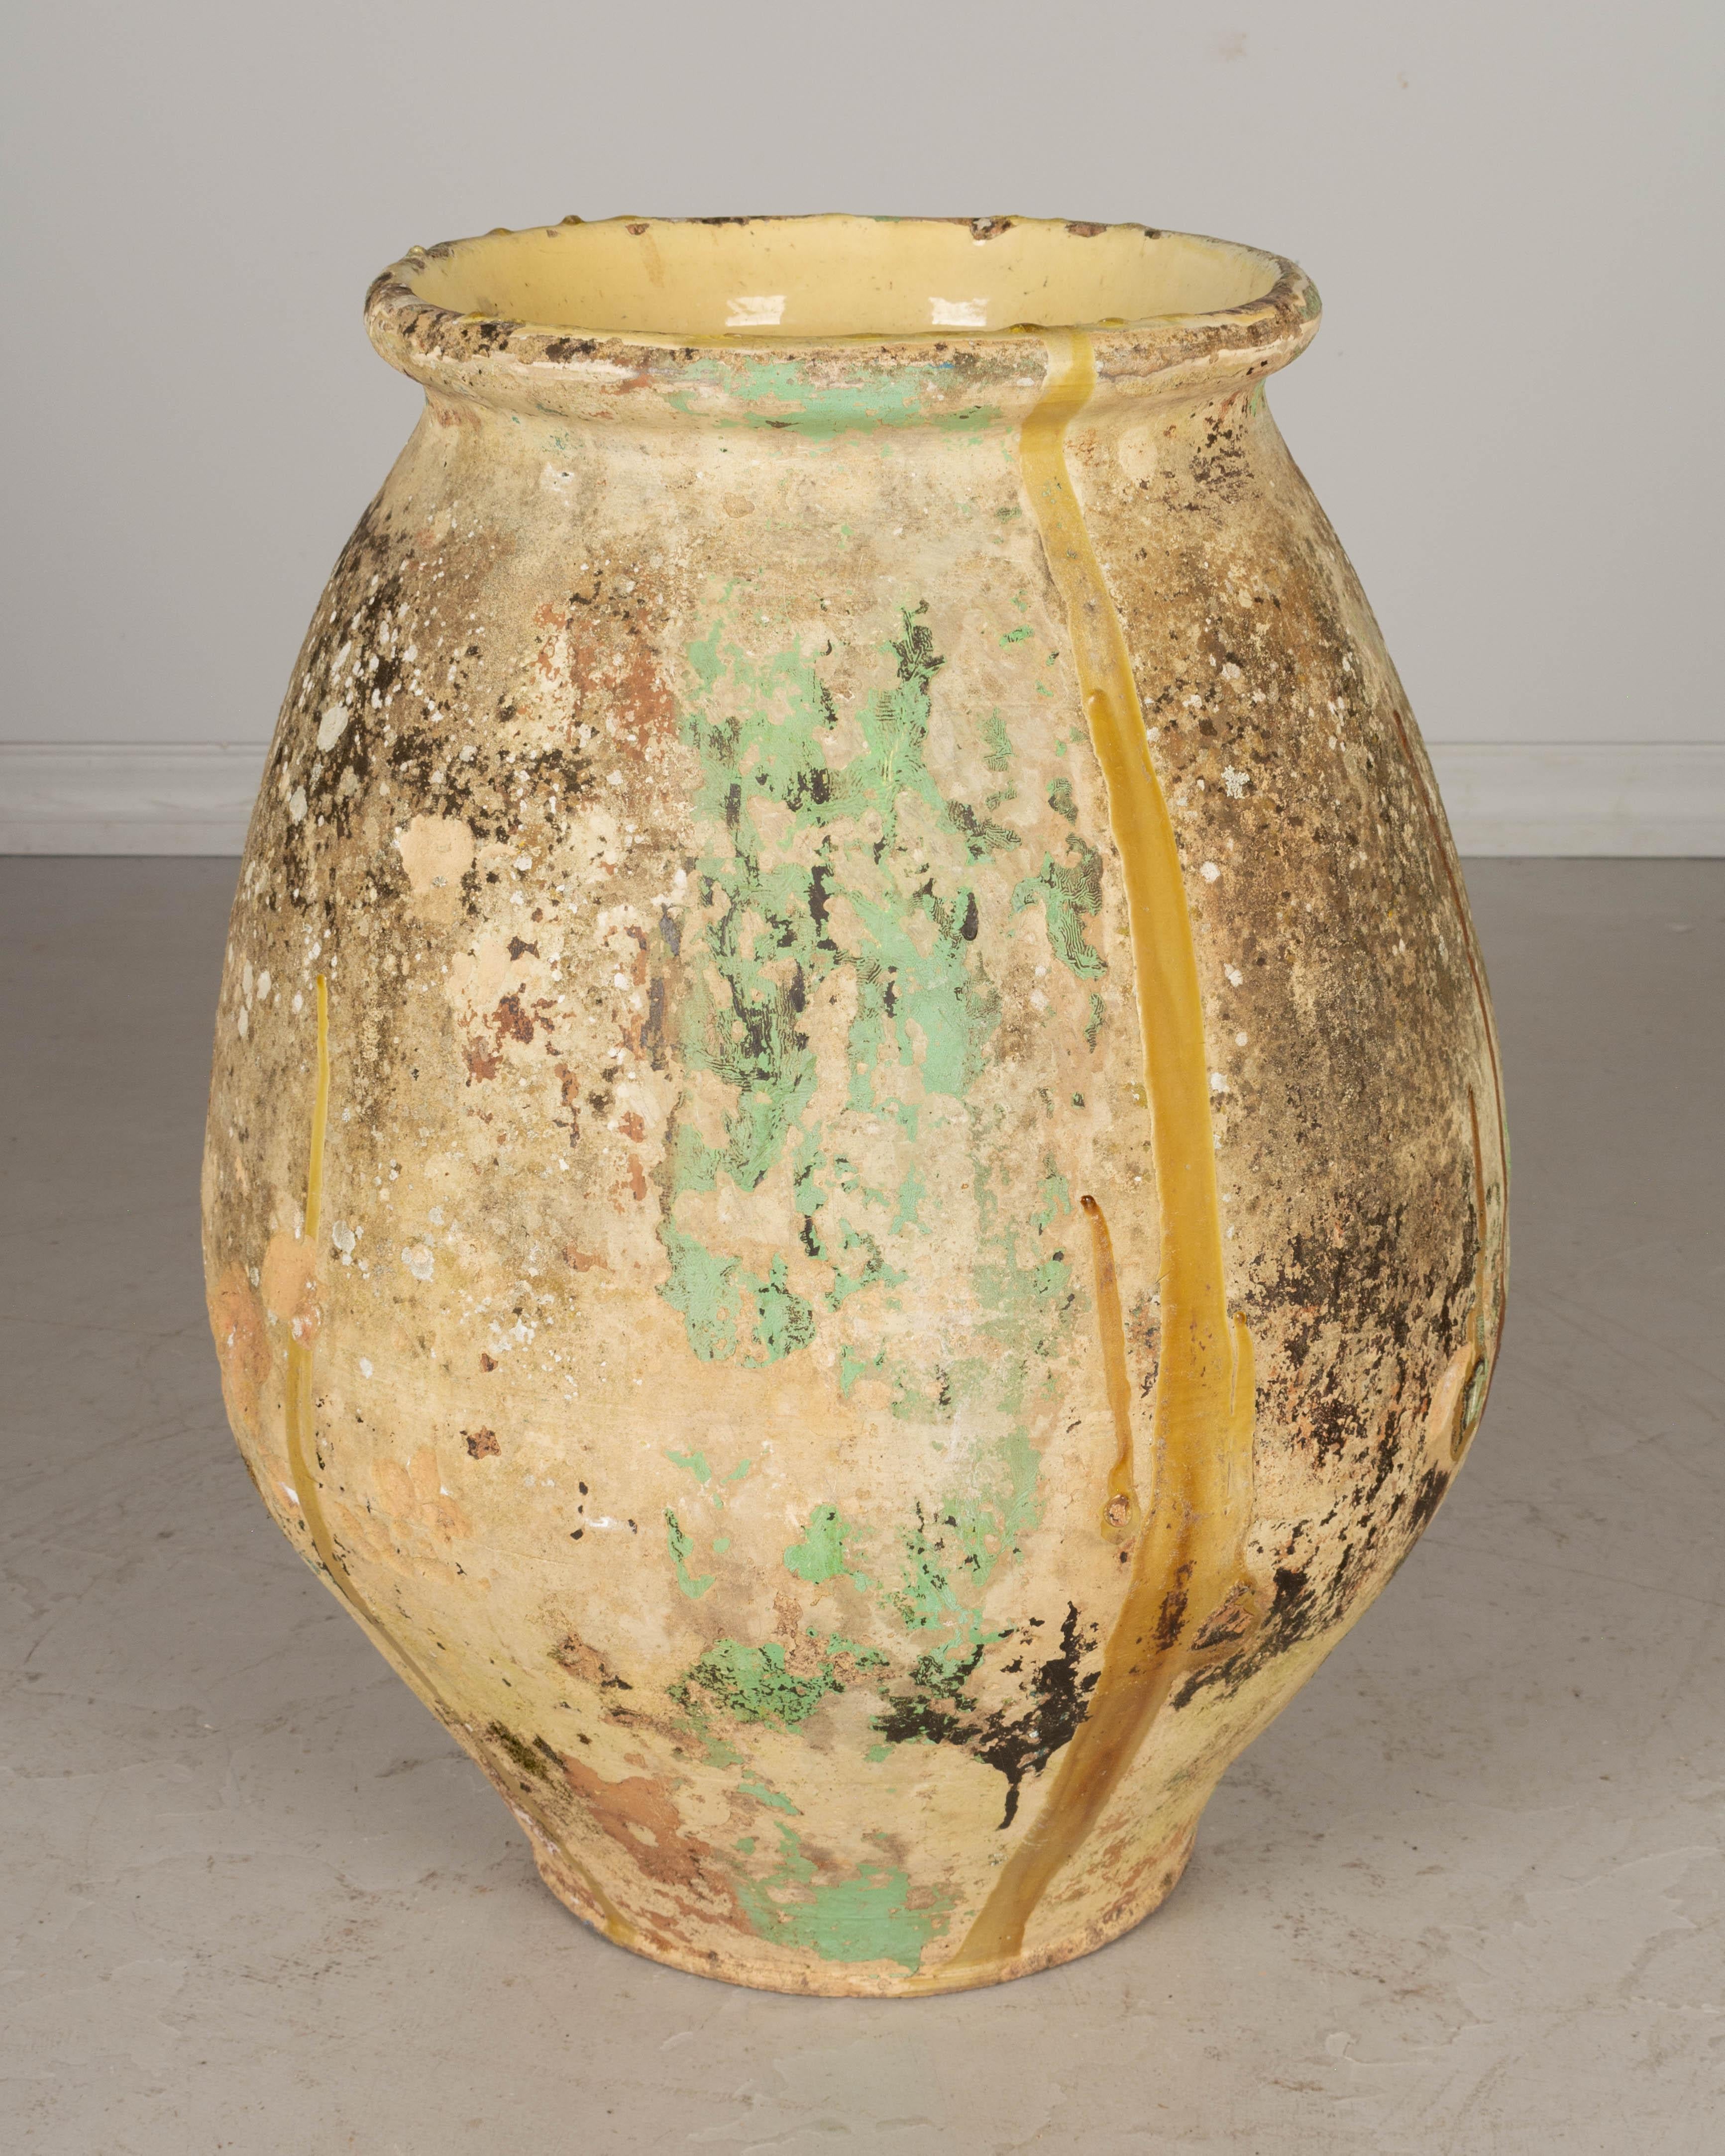 A large early 19th century French terracotta pottery Biot jar in classic shape and having a lovely aged patina with remnants of old green and yellow ochre drip glaze. Hand formed using the ancient technique of rope thrown pottery, these jars were